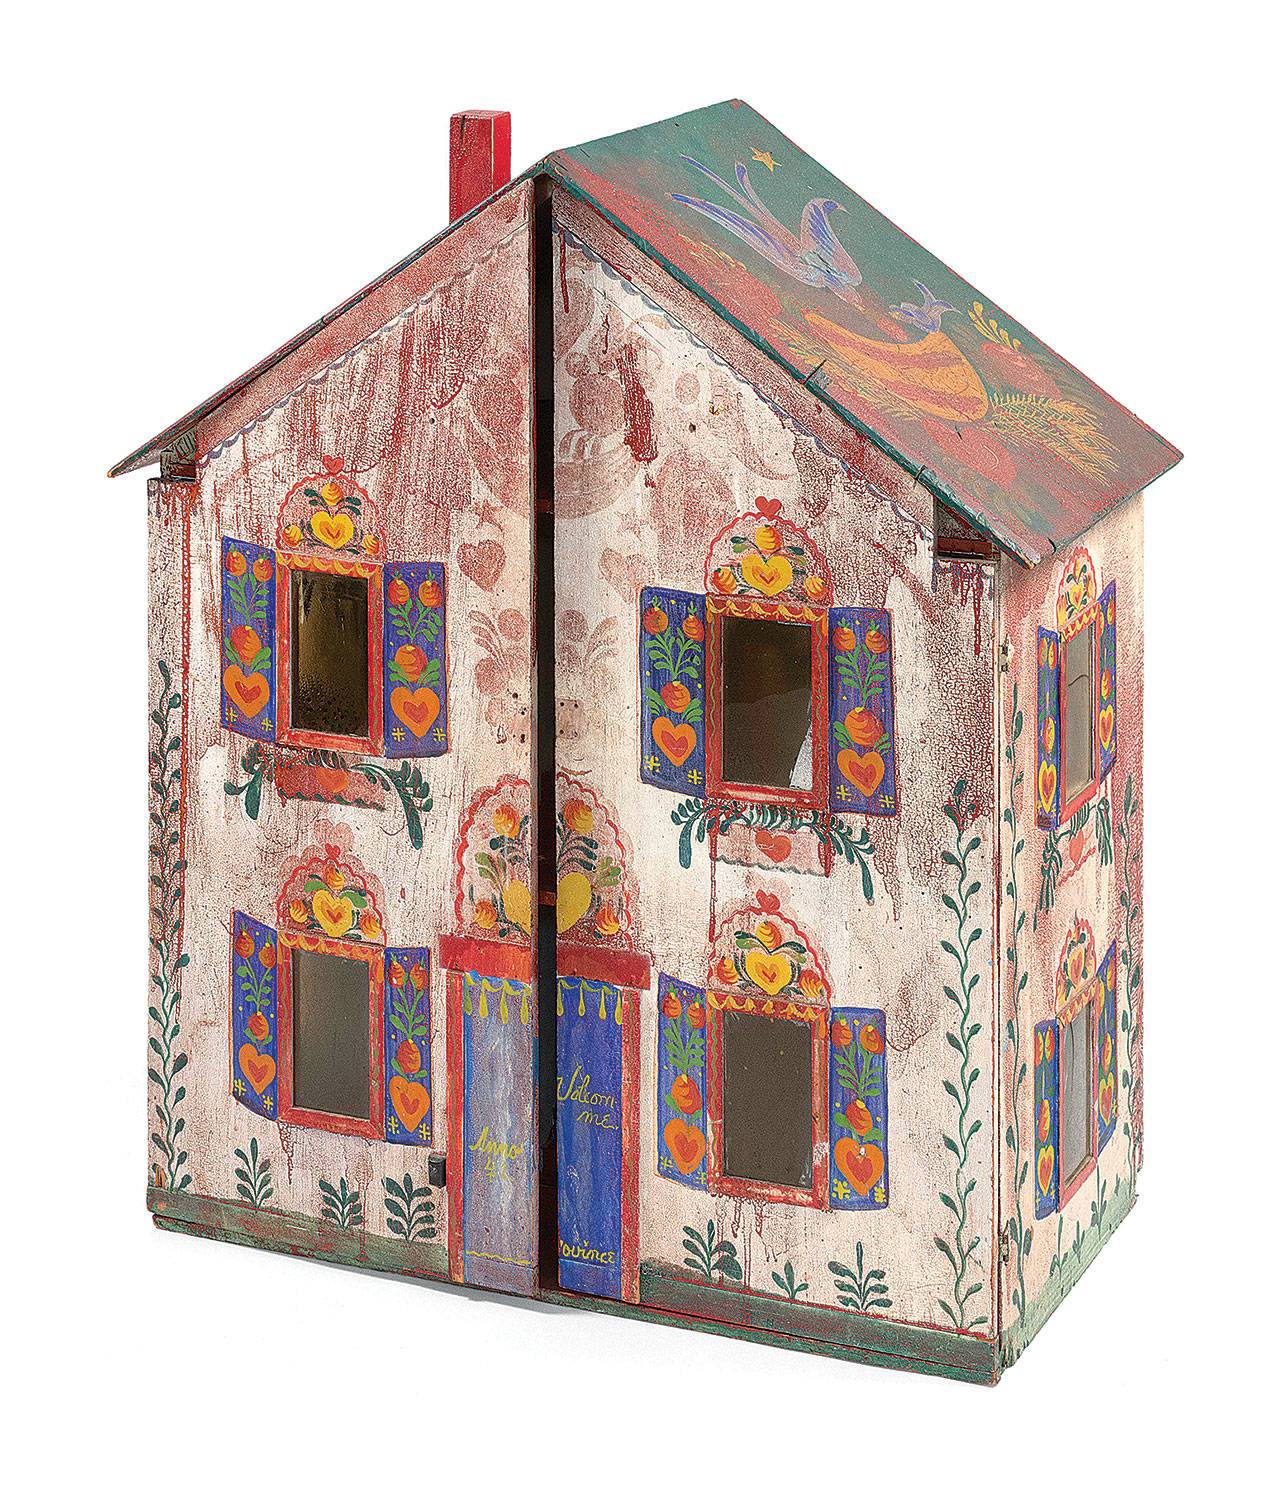 The folk art paintings on the dollhouse are the signed work of Peter Hunt. The 39-inch-high plywood toy was decorated in 1941. (Cowles Syndicate Inc.)